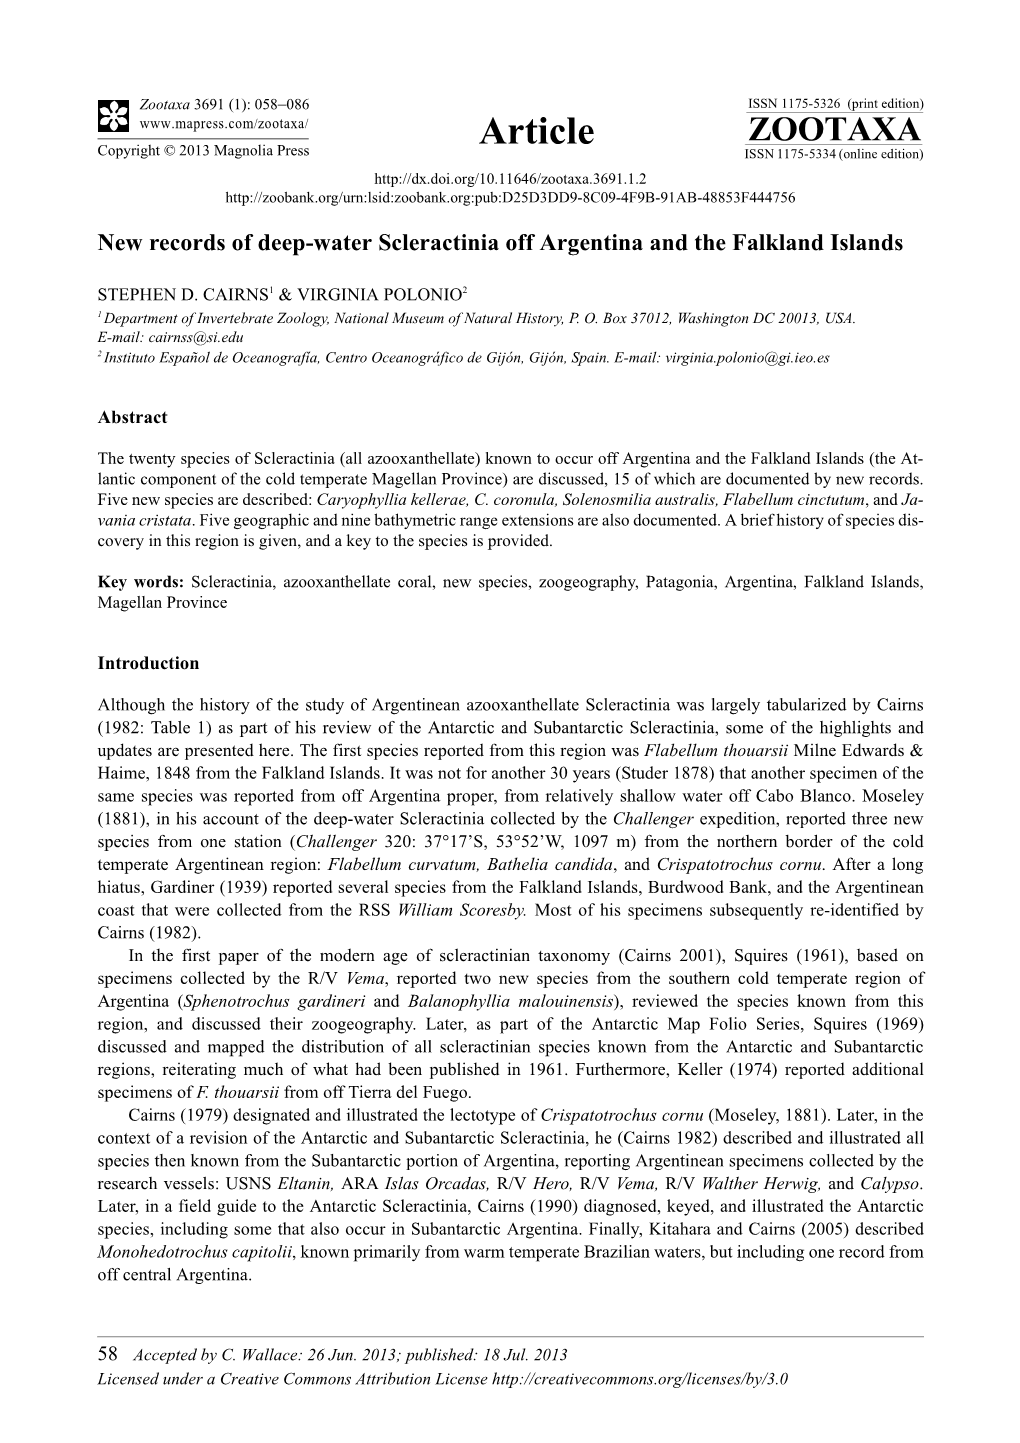 New Records of Deep-Water Scleractinia Off Argentina and the Falkland Islands